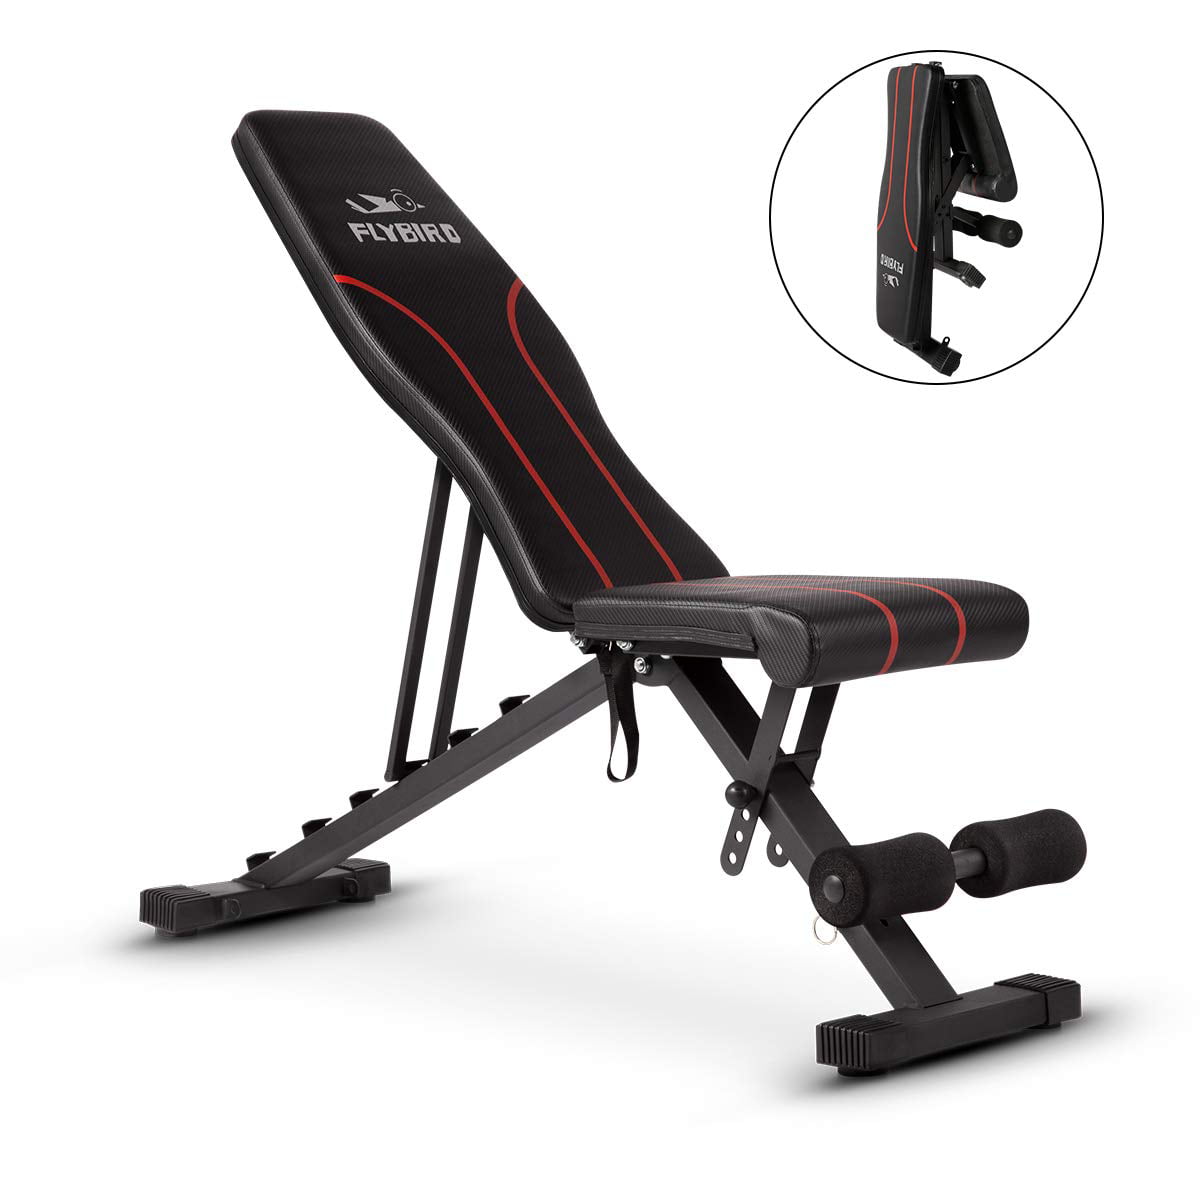 ADJUSTABLE WORKOUT BENCH Weight Lifting Press Foldable Compact Exercise Fitness 